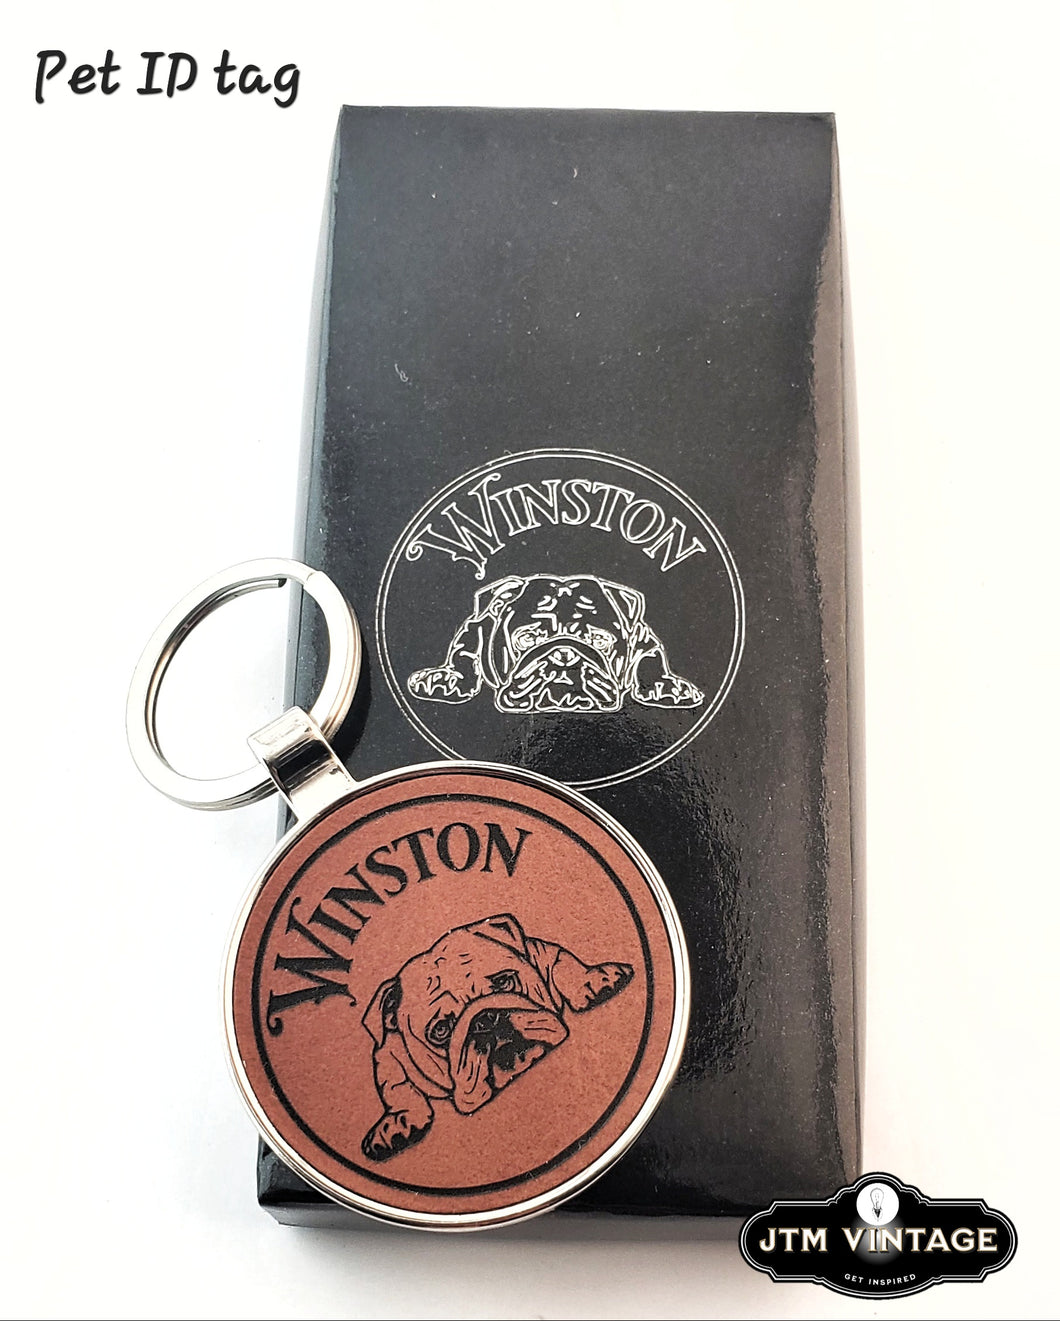 Pet / Dog tag Personalized leather and metal with matching giftbox! -  DESIGN YOUR OWN -Custom - Personalized